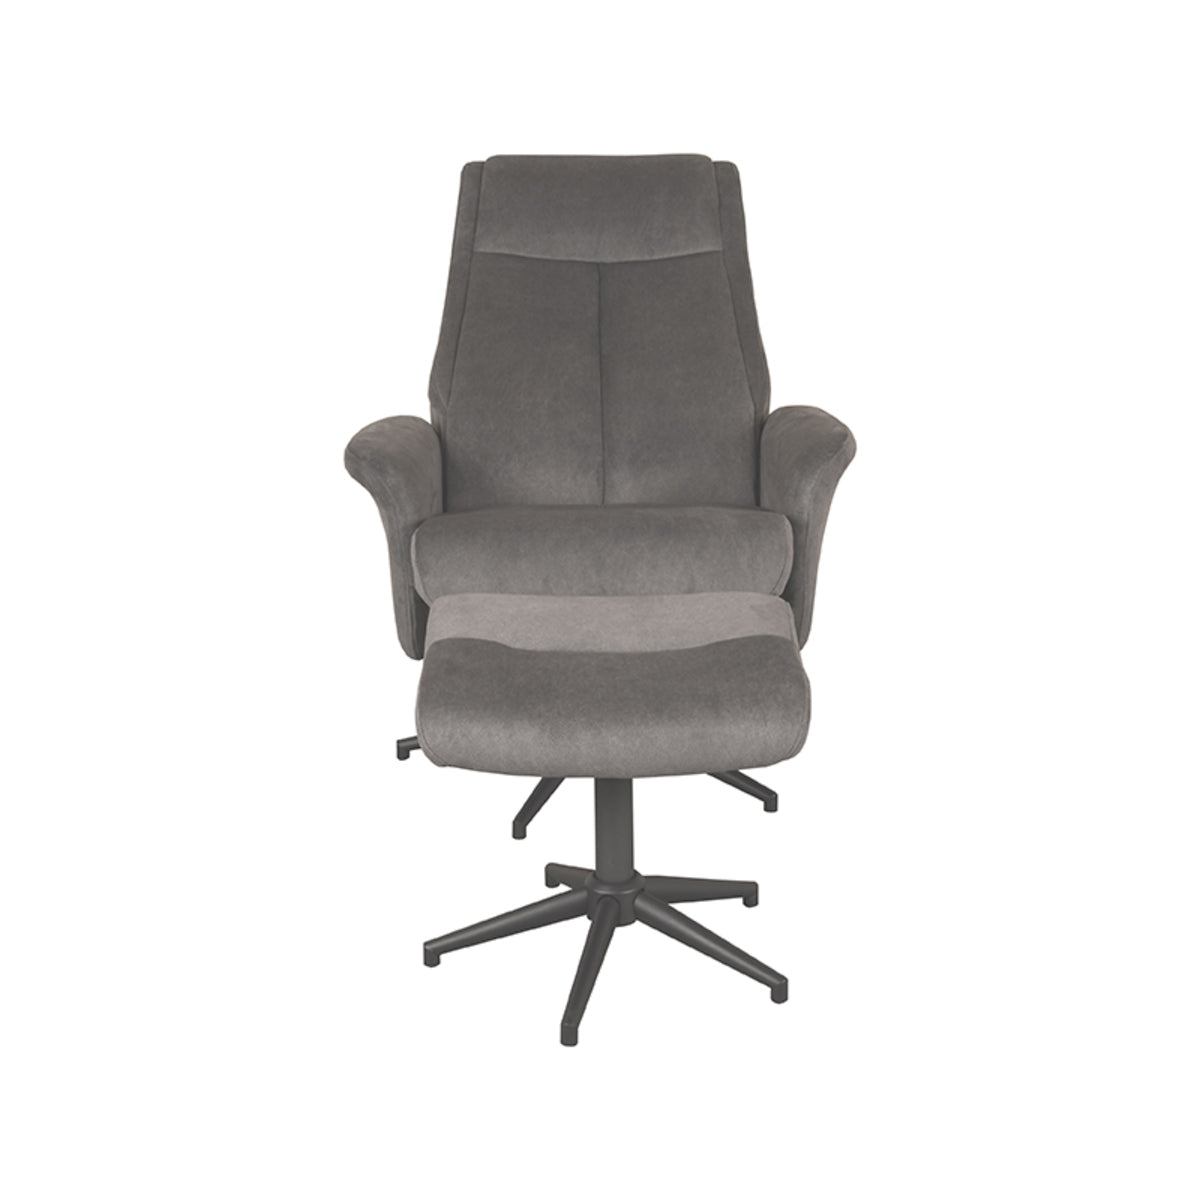 LABEL51 Fauteuil Bergen - Antraciet - Cosmo - Incl. Ottoman